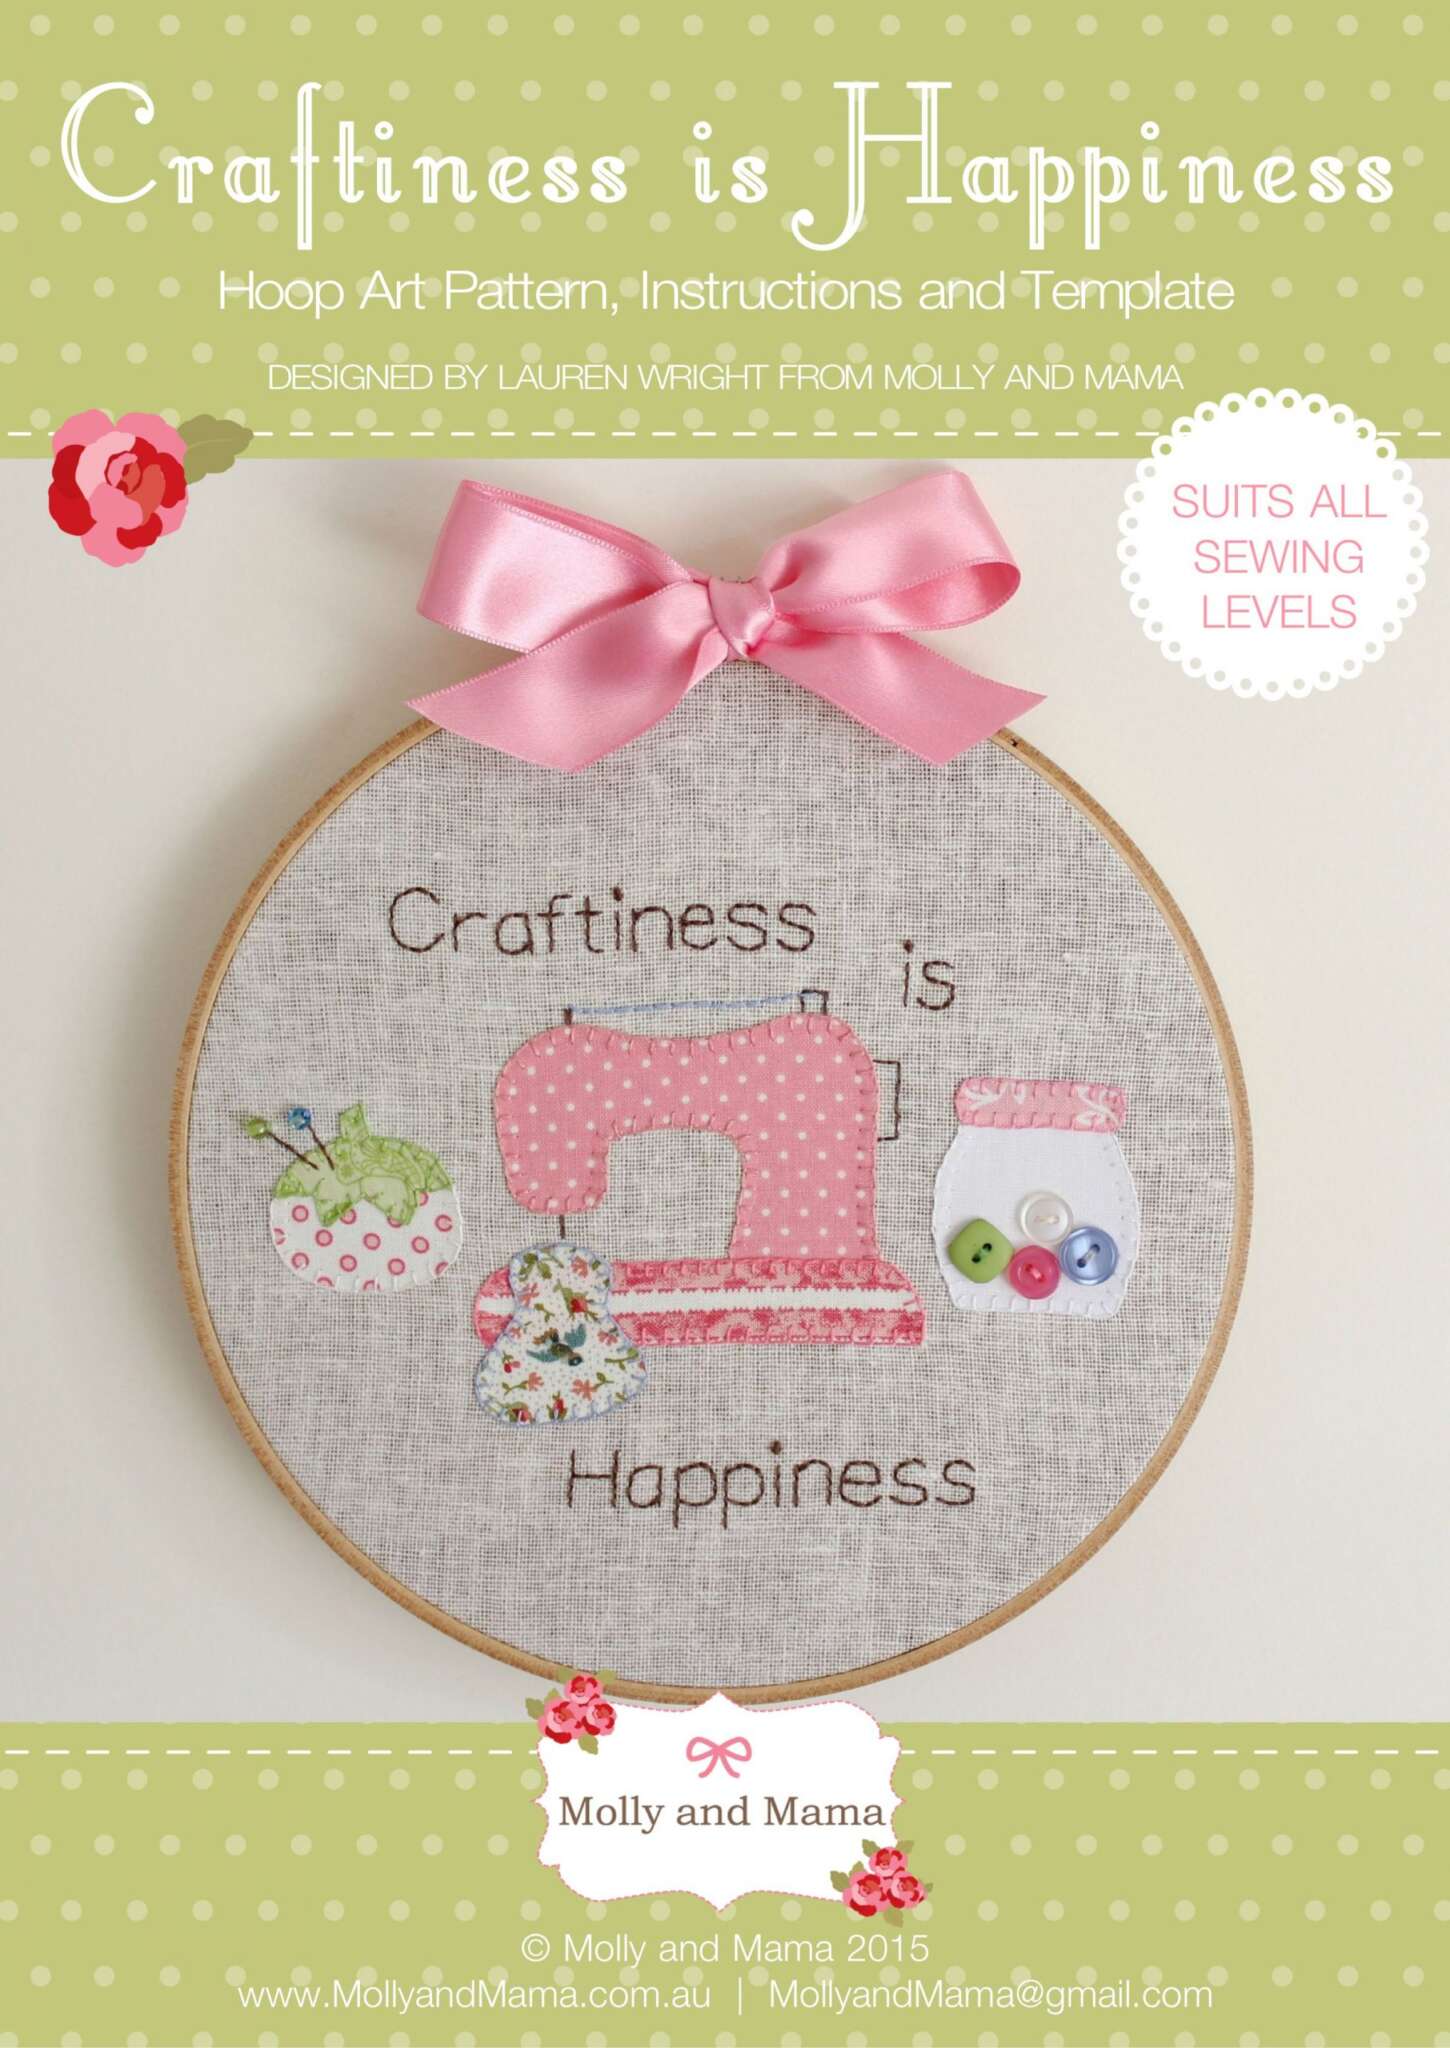 Introducing the ‘Craftiness is Happiness’ Hoop Art Pattern